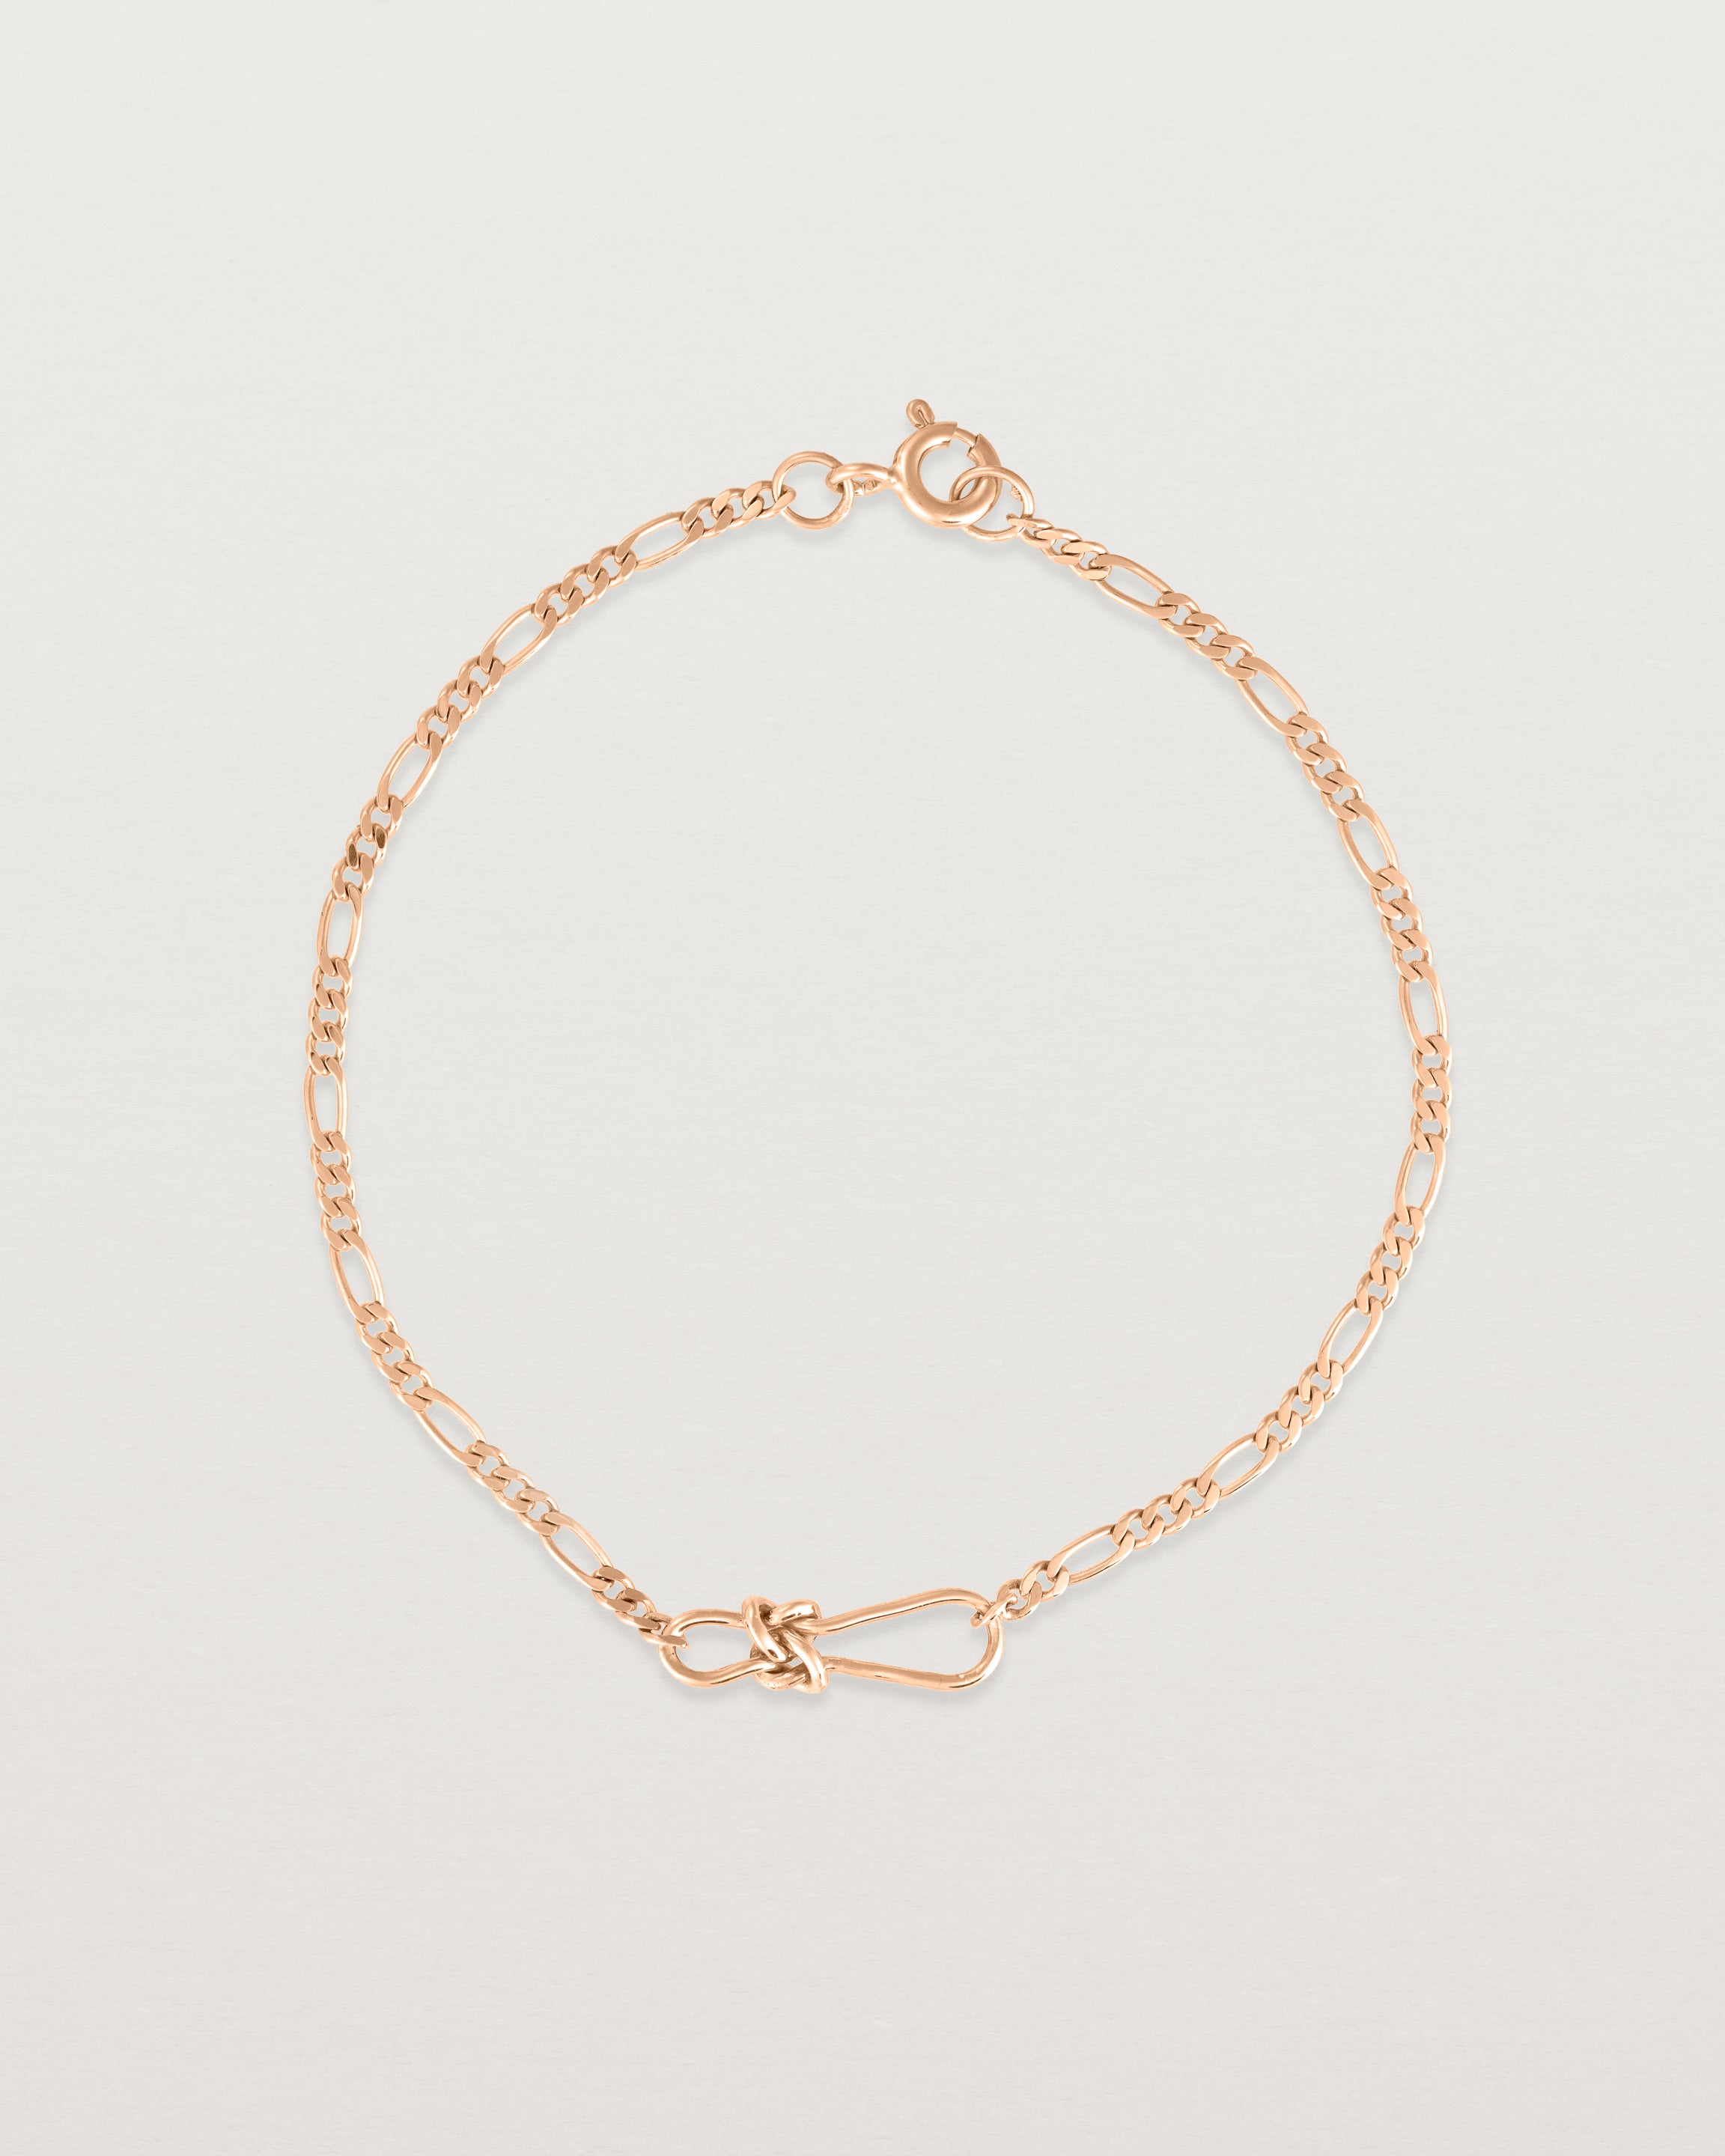 Top view of the Anam Bracelet in rose gold.